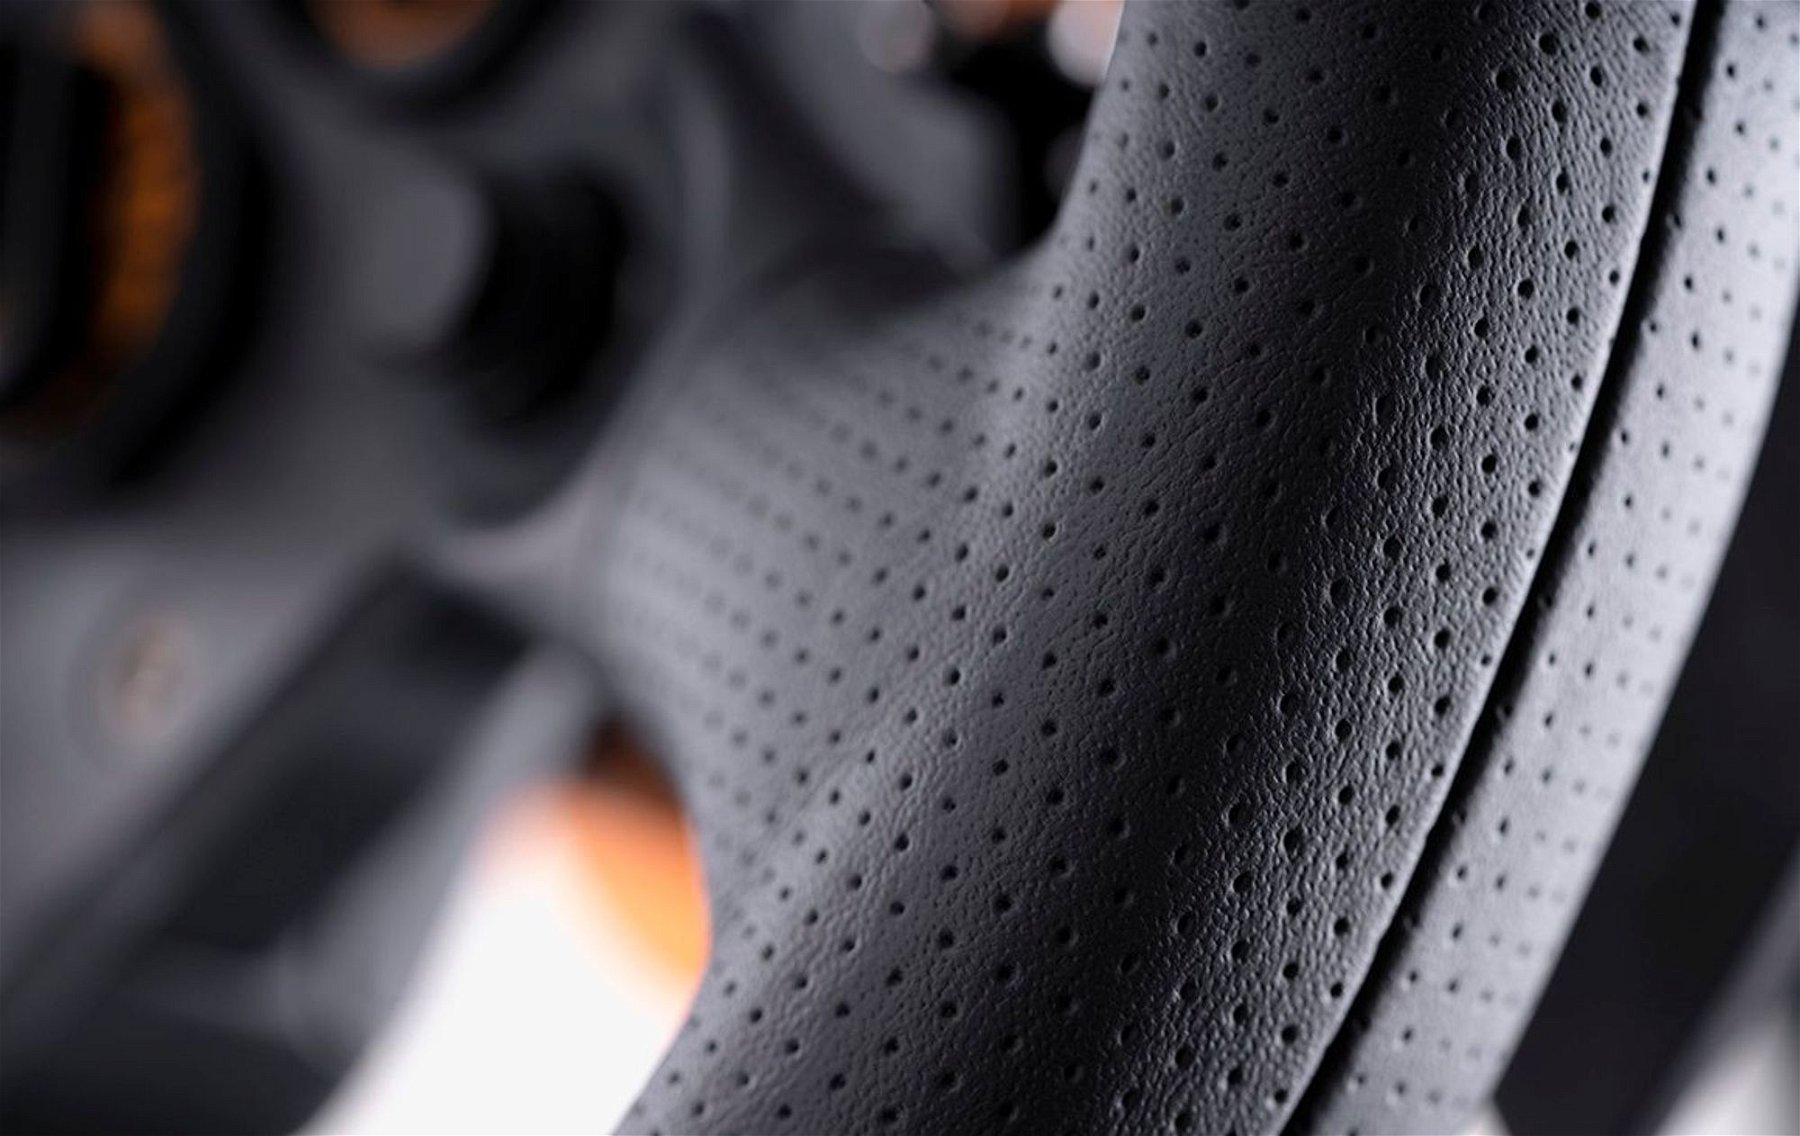 Perforated leather on a Fanatec wheel